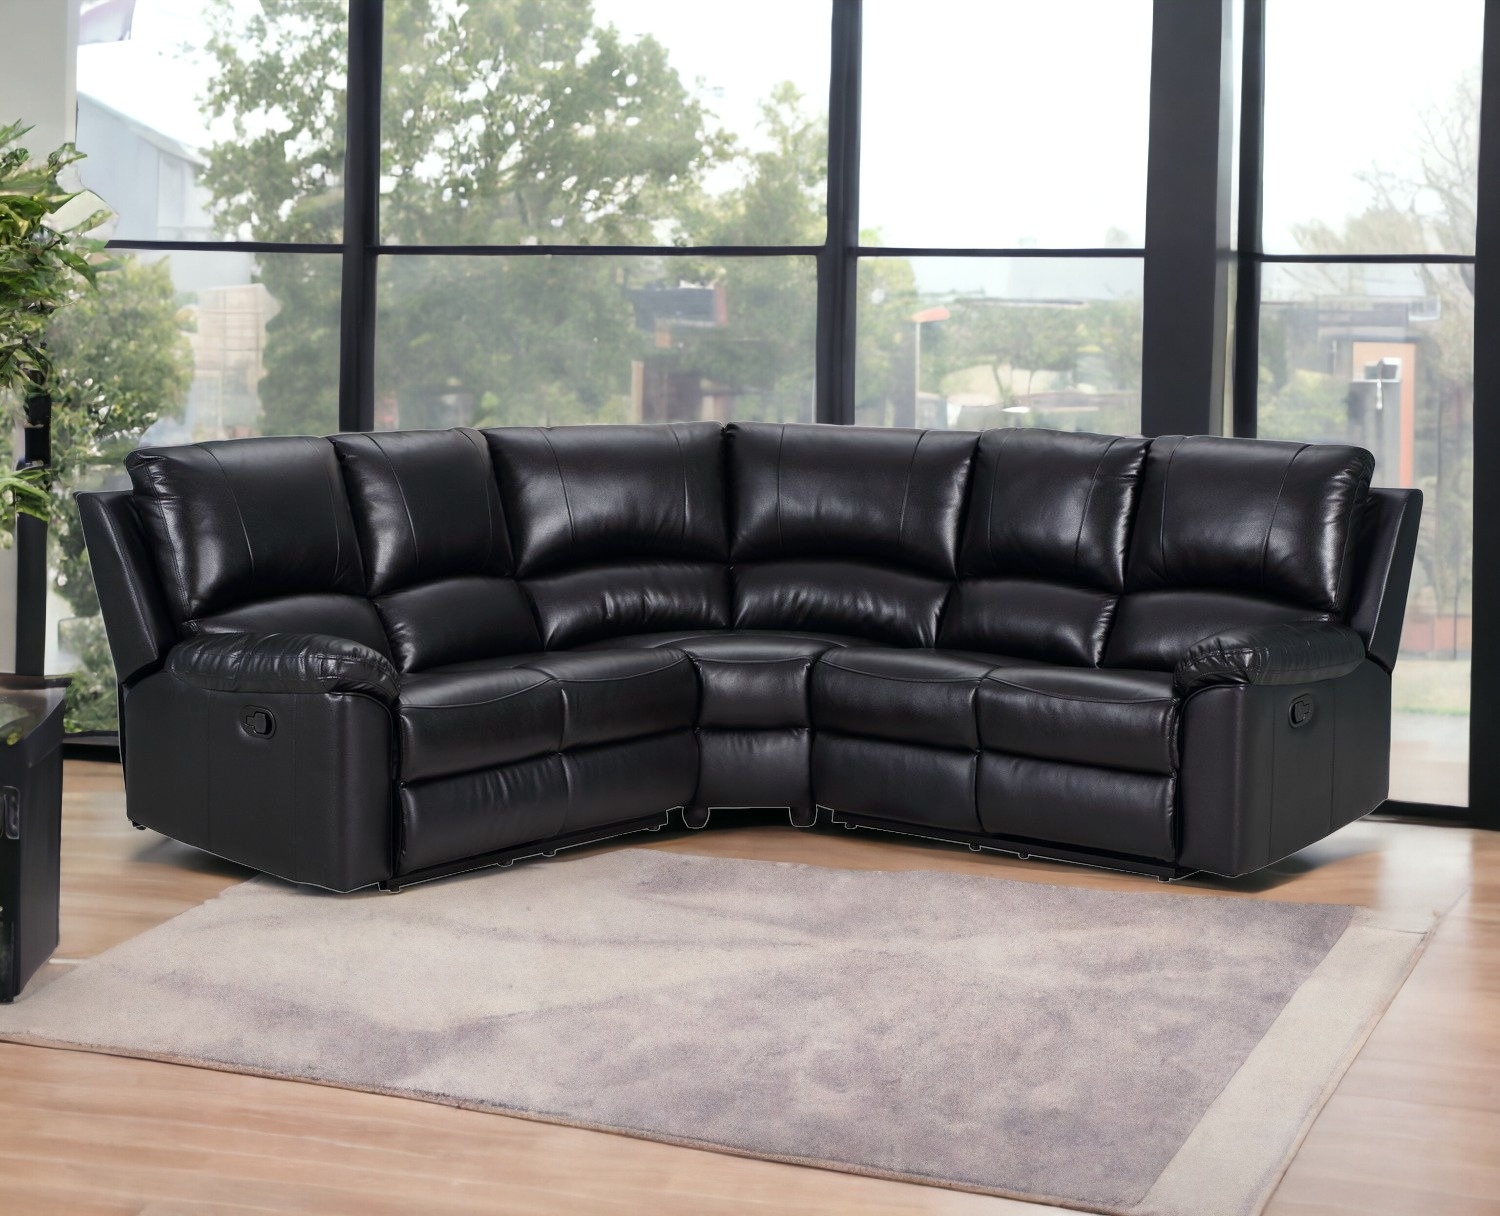 HomeRoots Black Polyester Blend Reclining U Shaped Three Piece Corner Sectional